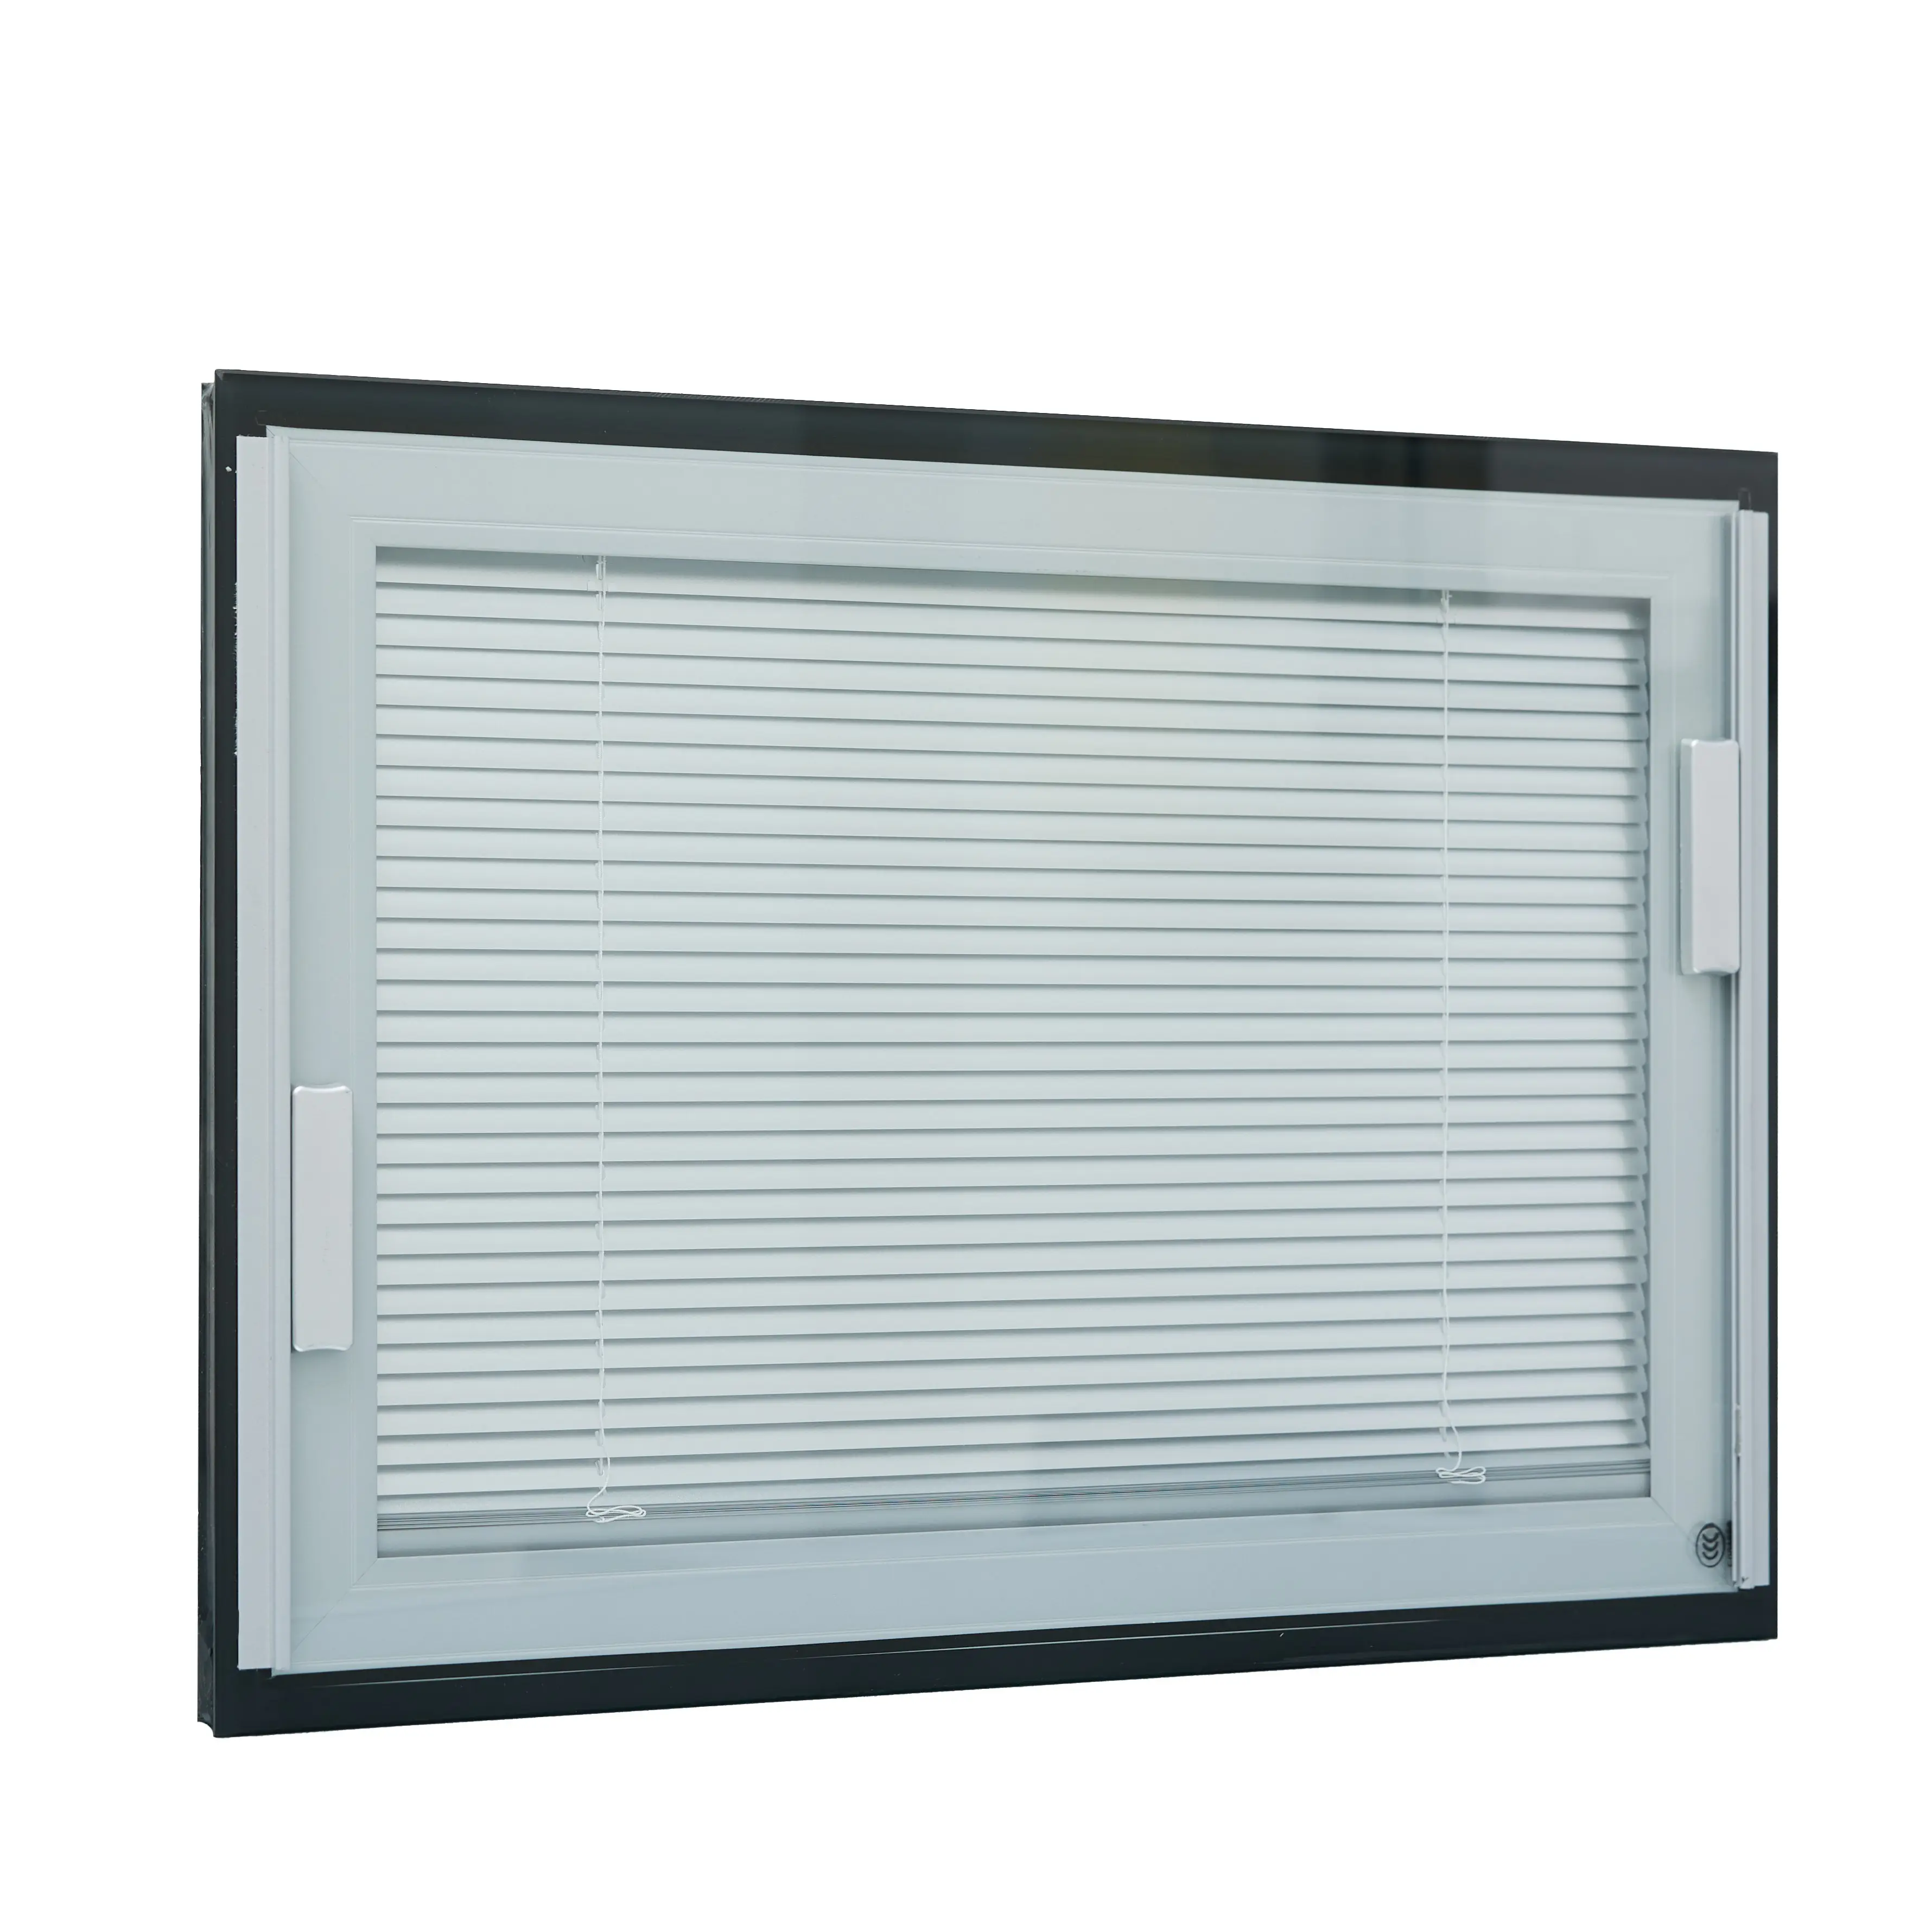 High-quality child-safe blinds Anti-breakage high-quality hollow shutter glass that has been used for 70 years